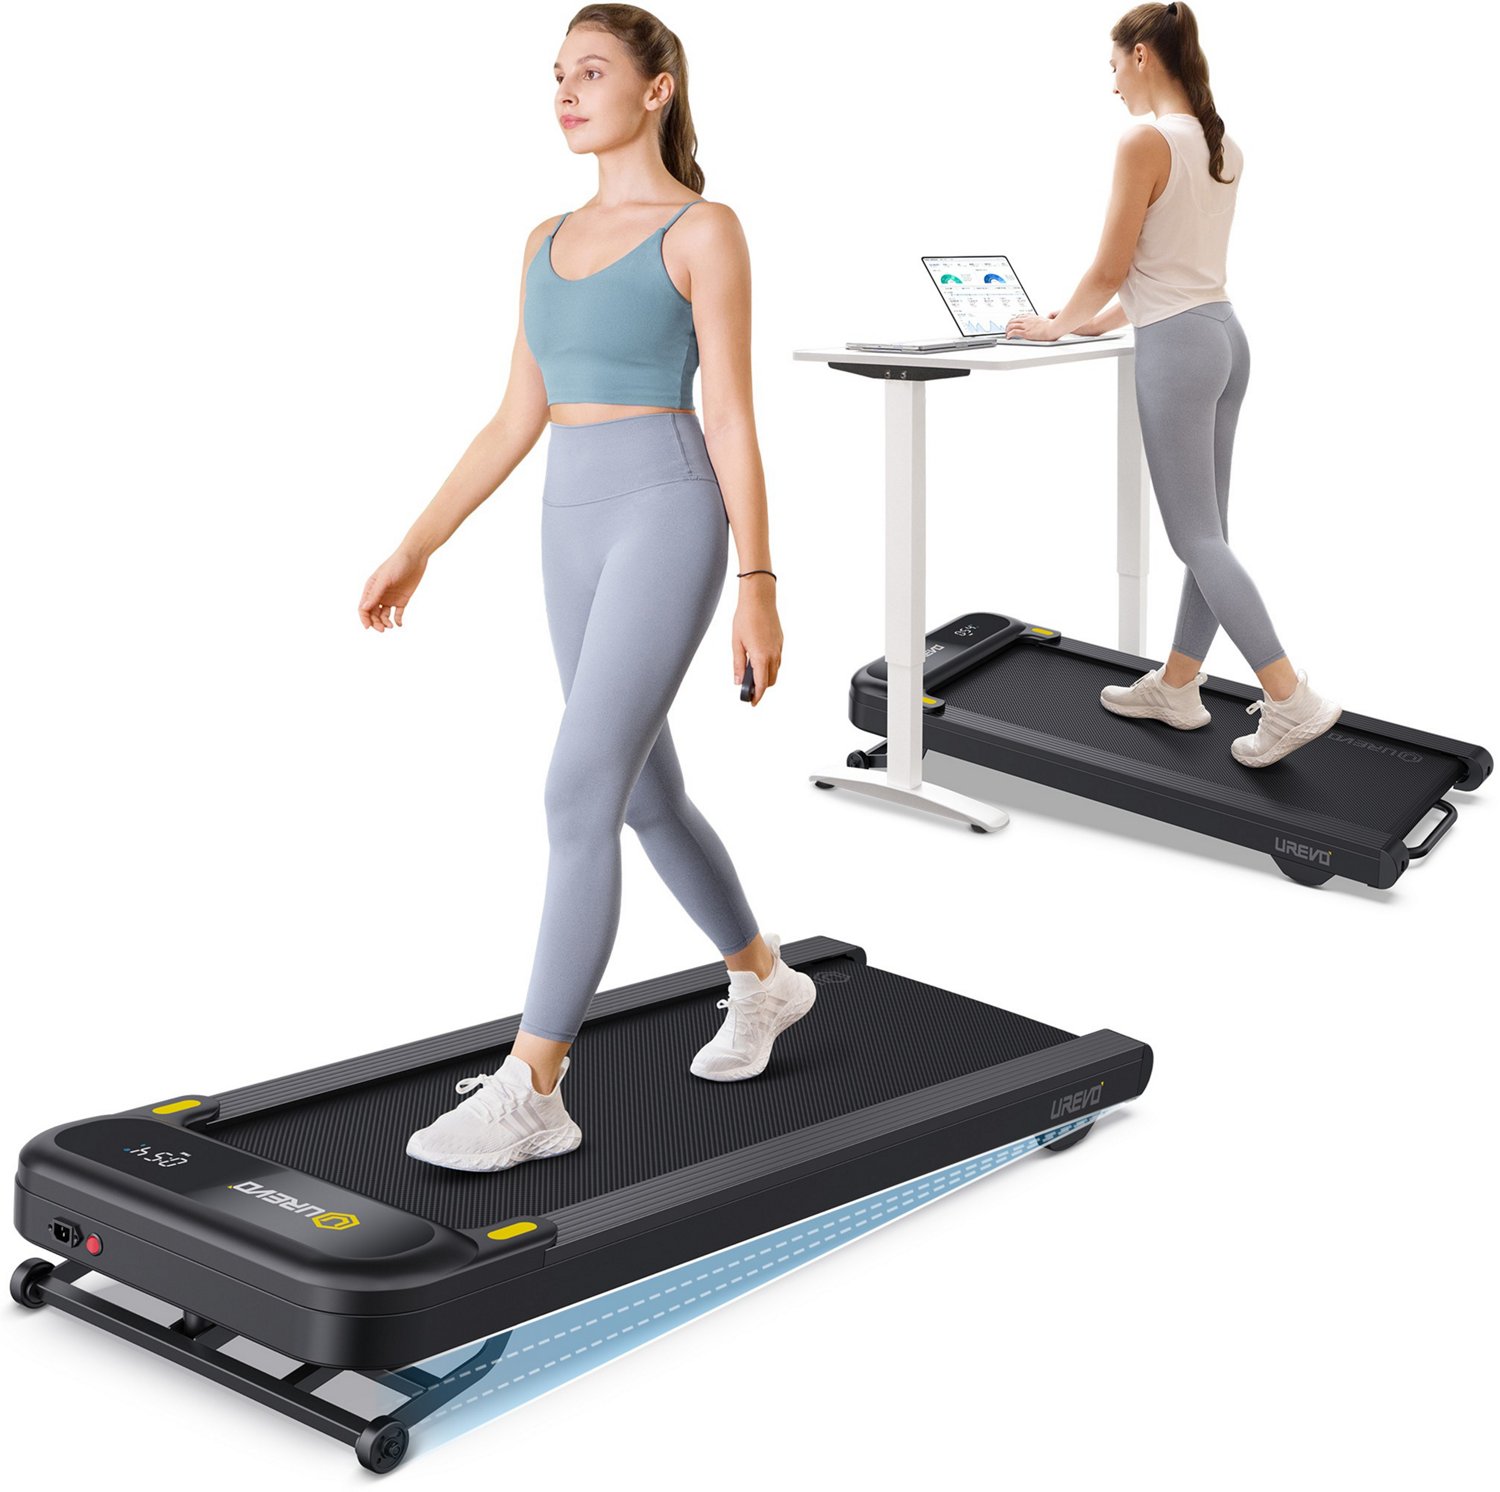 UREVO 3S Walking Treadmill with Auto Incline                                                                                     - view number 1 selected